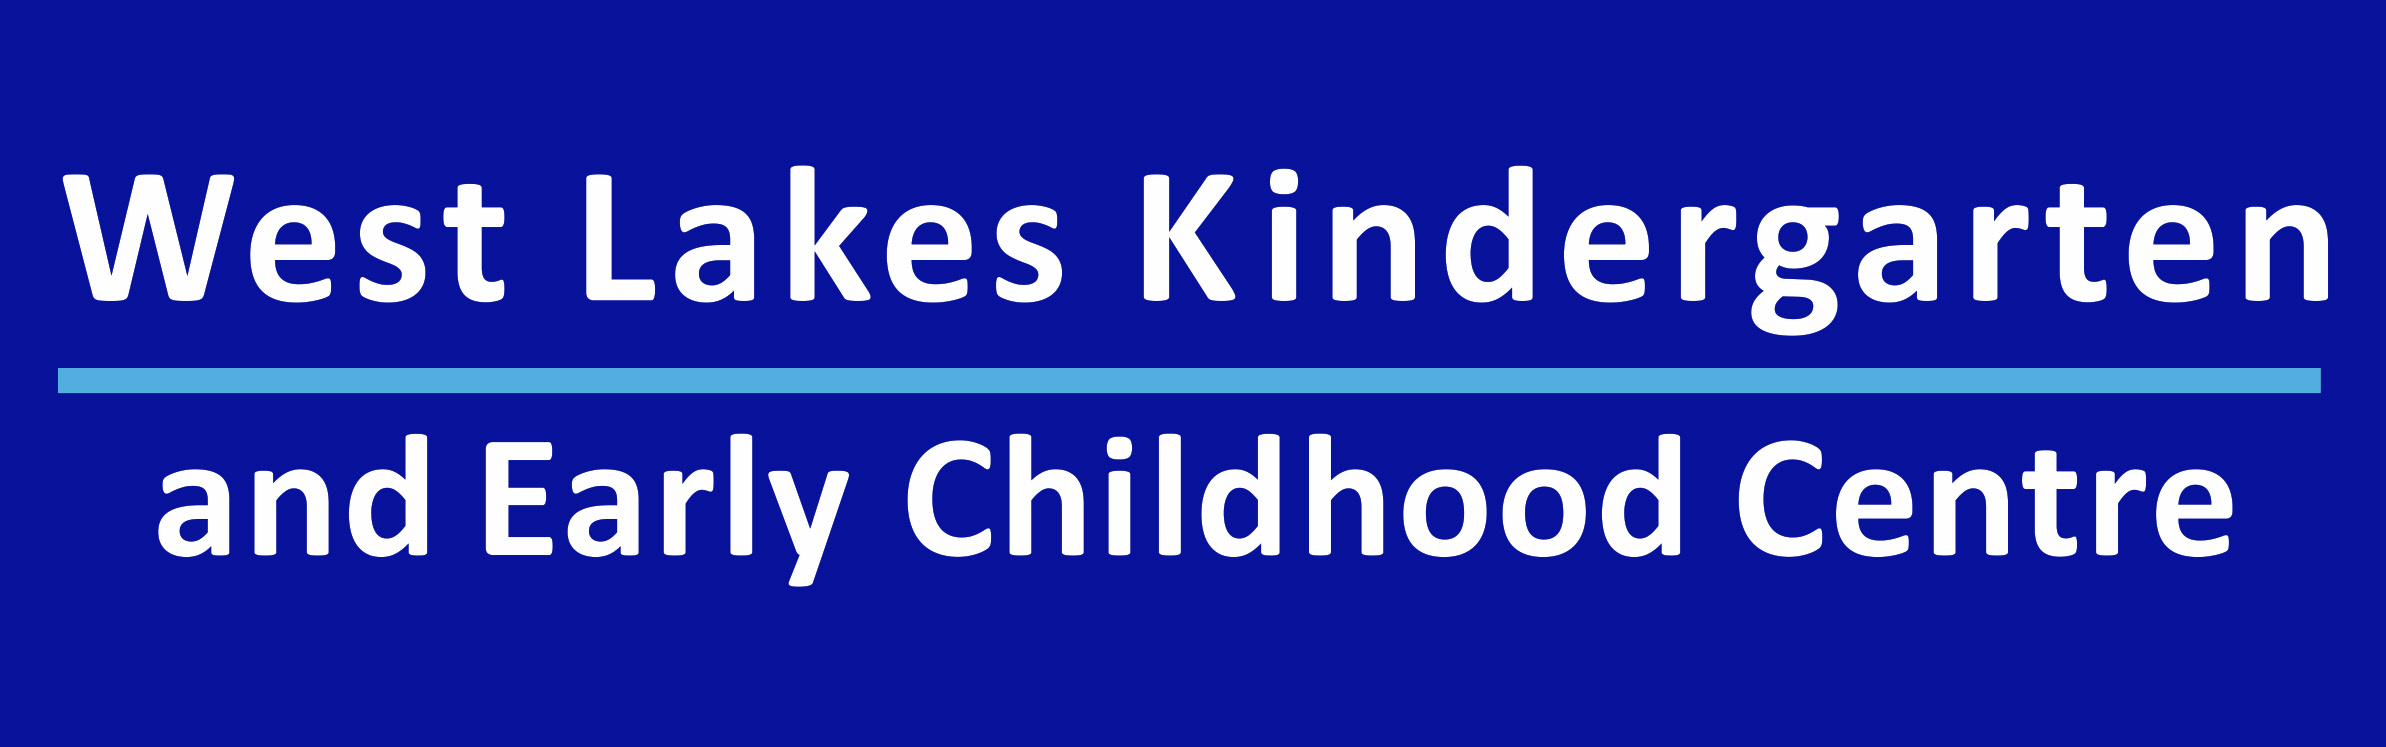 West Lakes Kindergarten and Early Childhood Centre